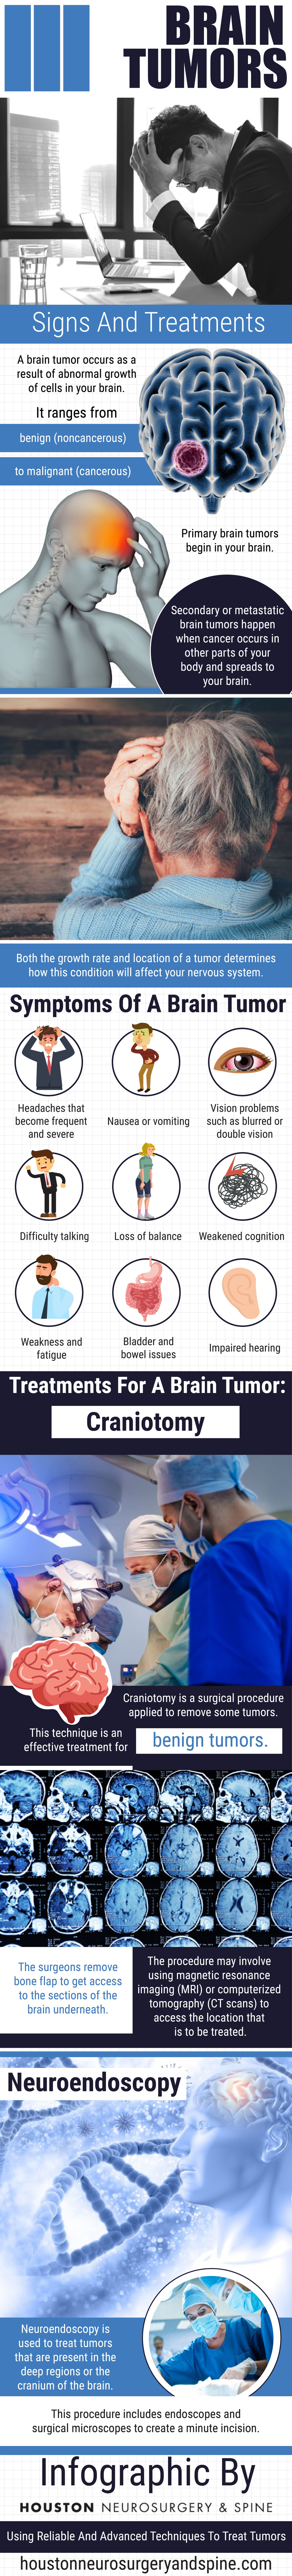 Brain Tumors: Signs and Treatments